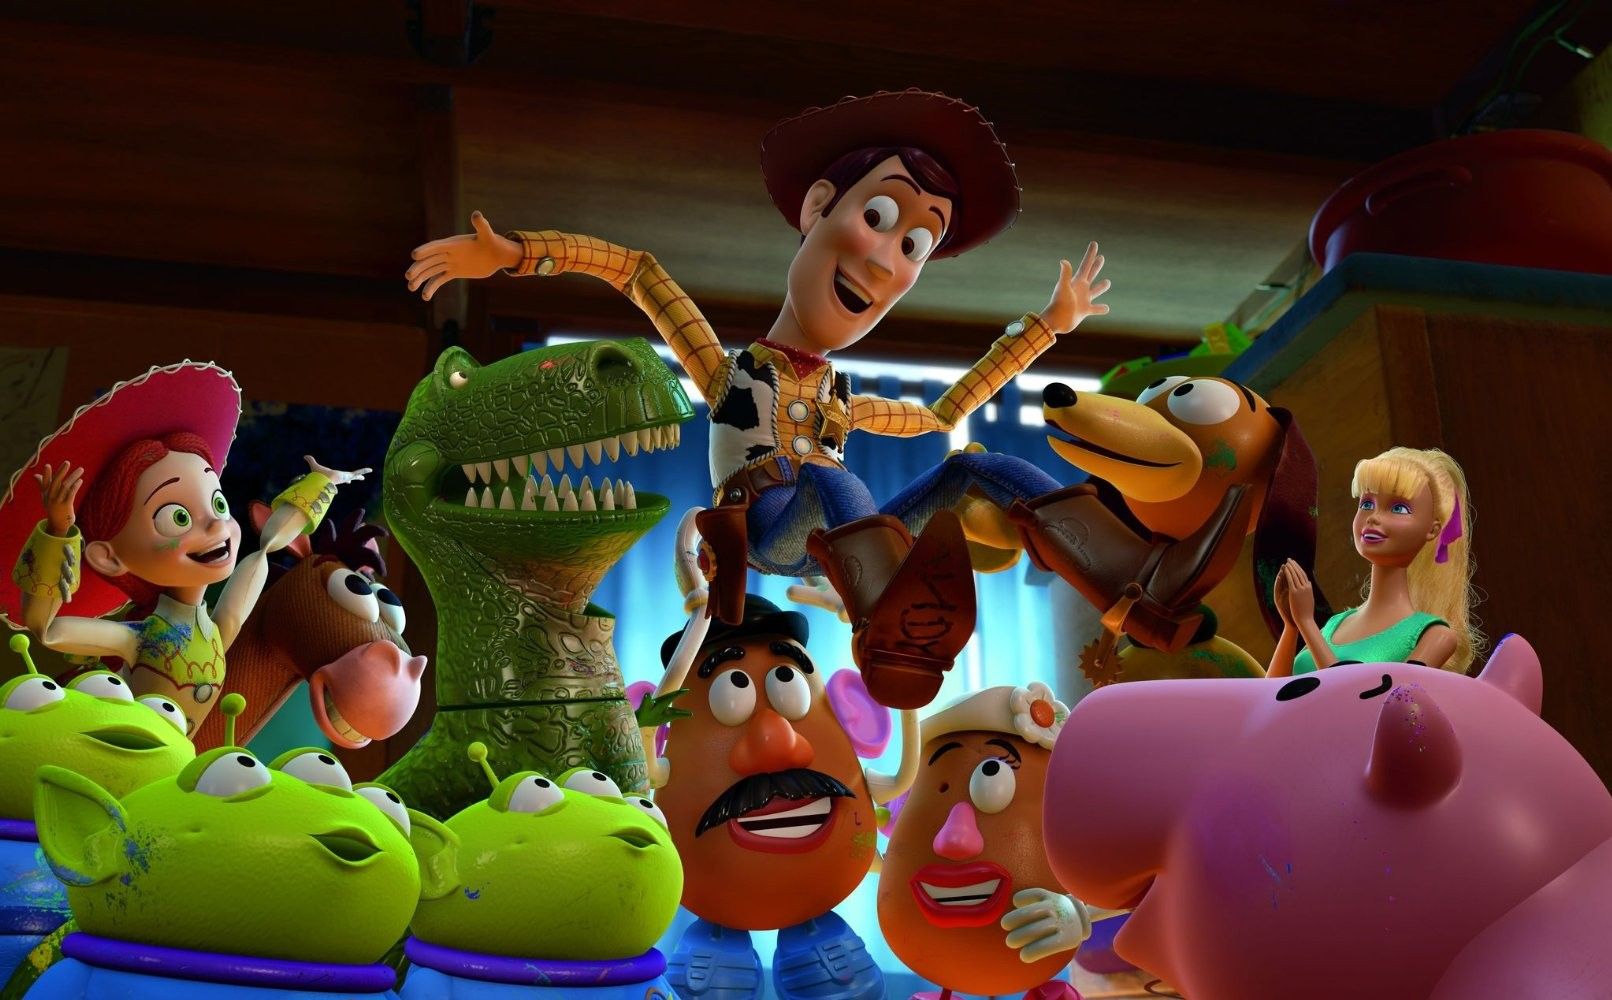 Learn the Art of Storytelling with Free 'Pixar in a Box'